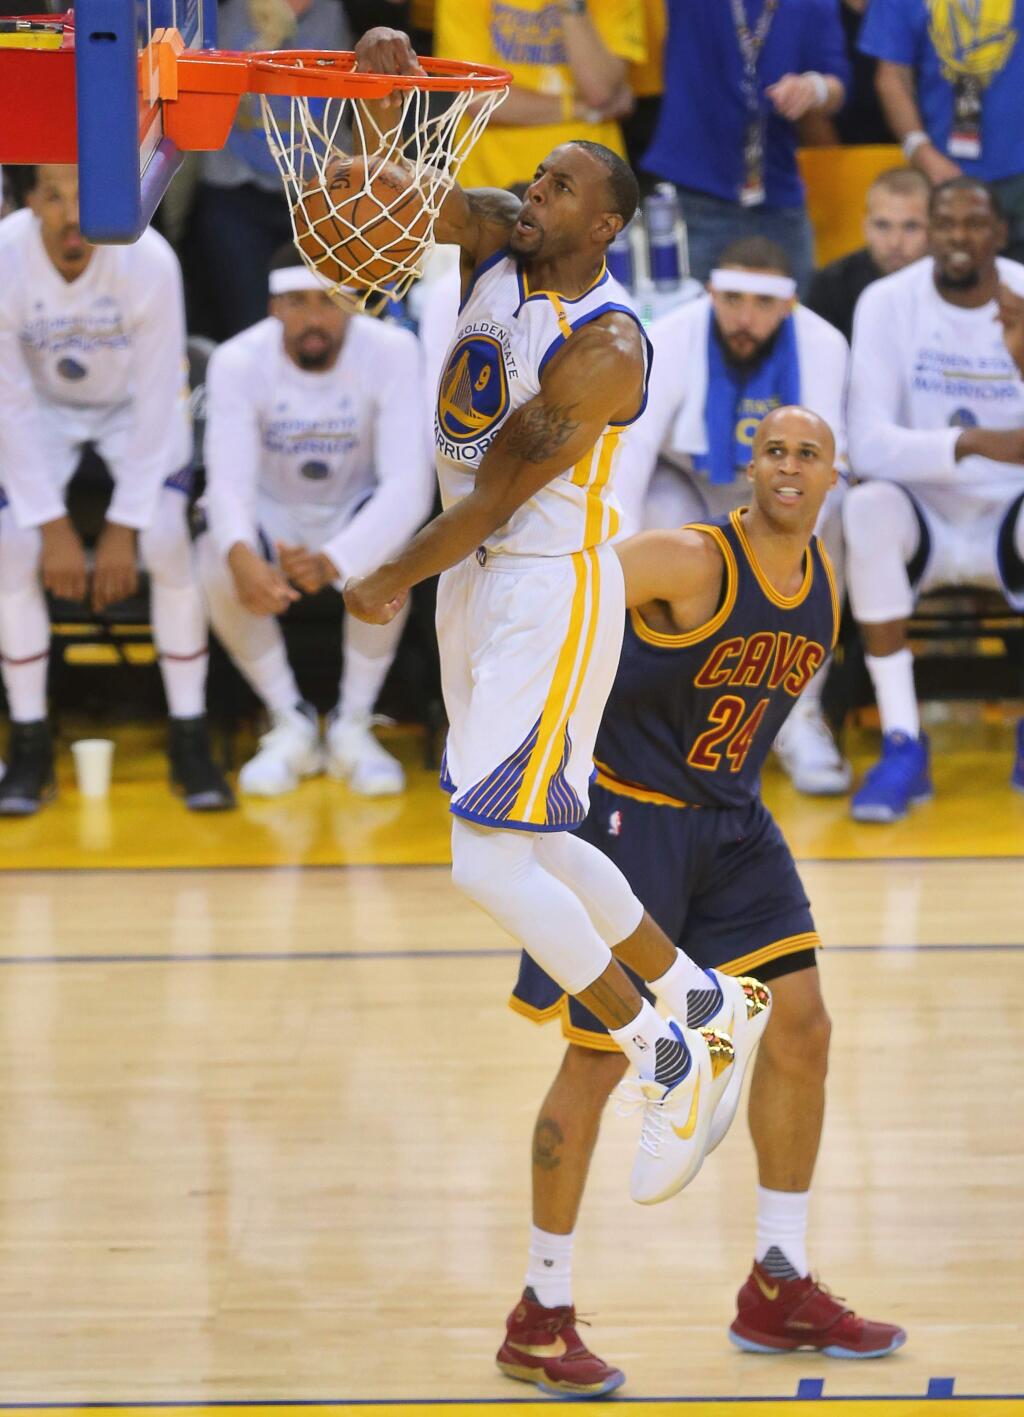 Golden State Warriors forward Andre Iguodala dunks the ball over Cleveland Cavaliers forward Richard Jefferson during game 1 of the NBA Finals in Oakland on Thursday, June 1, 2017. The Warriors defeated the Cavaliers 113-91.(Christopher Chung/ The Press Democrat)